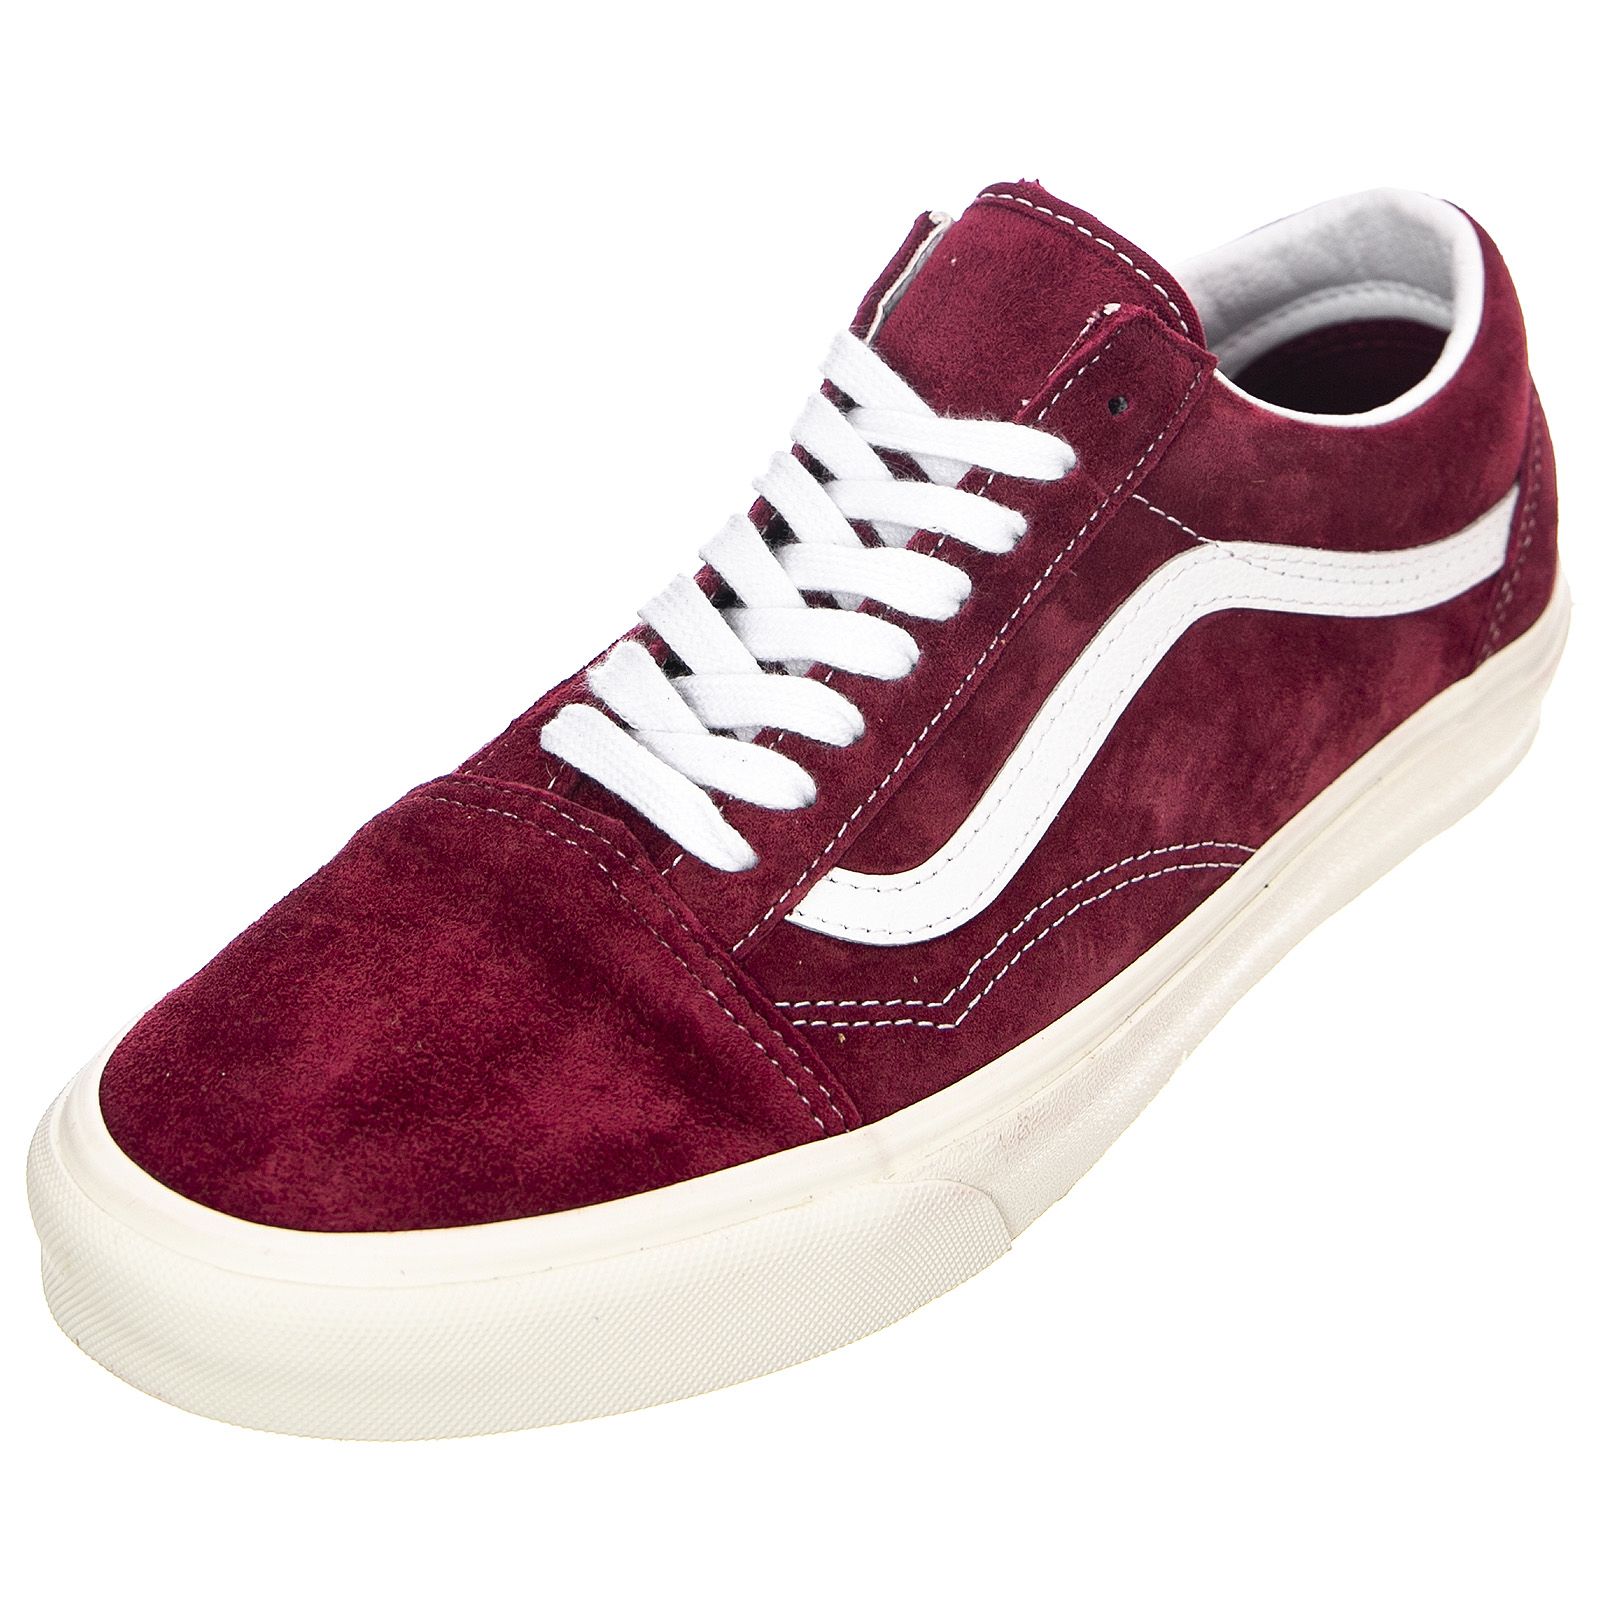 Vans UA Old Skool Pomegranate / Snow White Pig Suede Lace-Up Law-Profile Sh  | Buy on